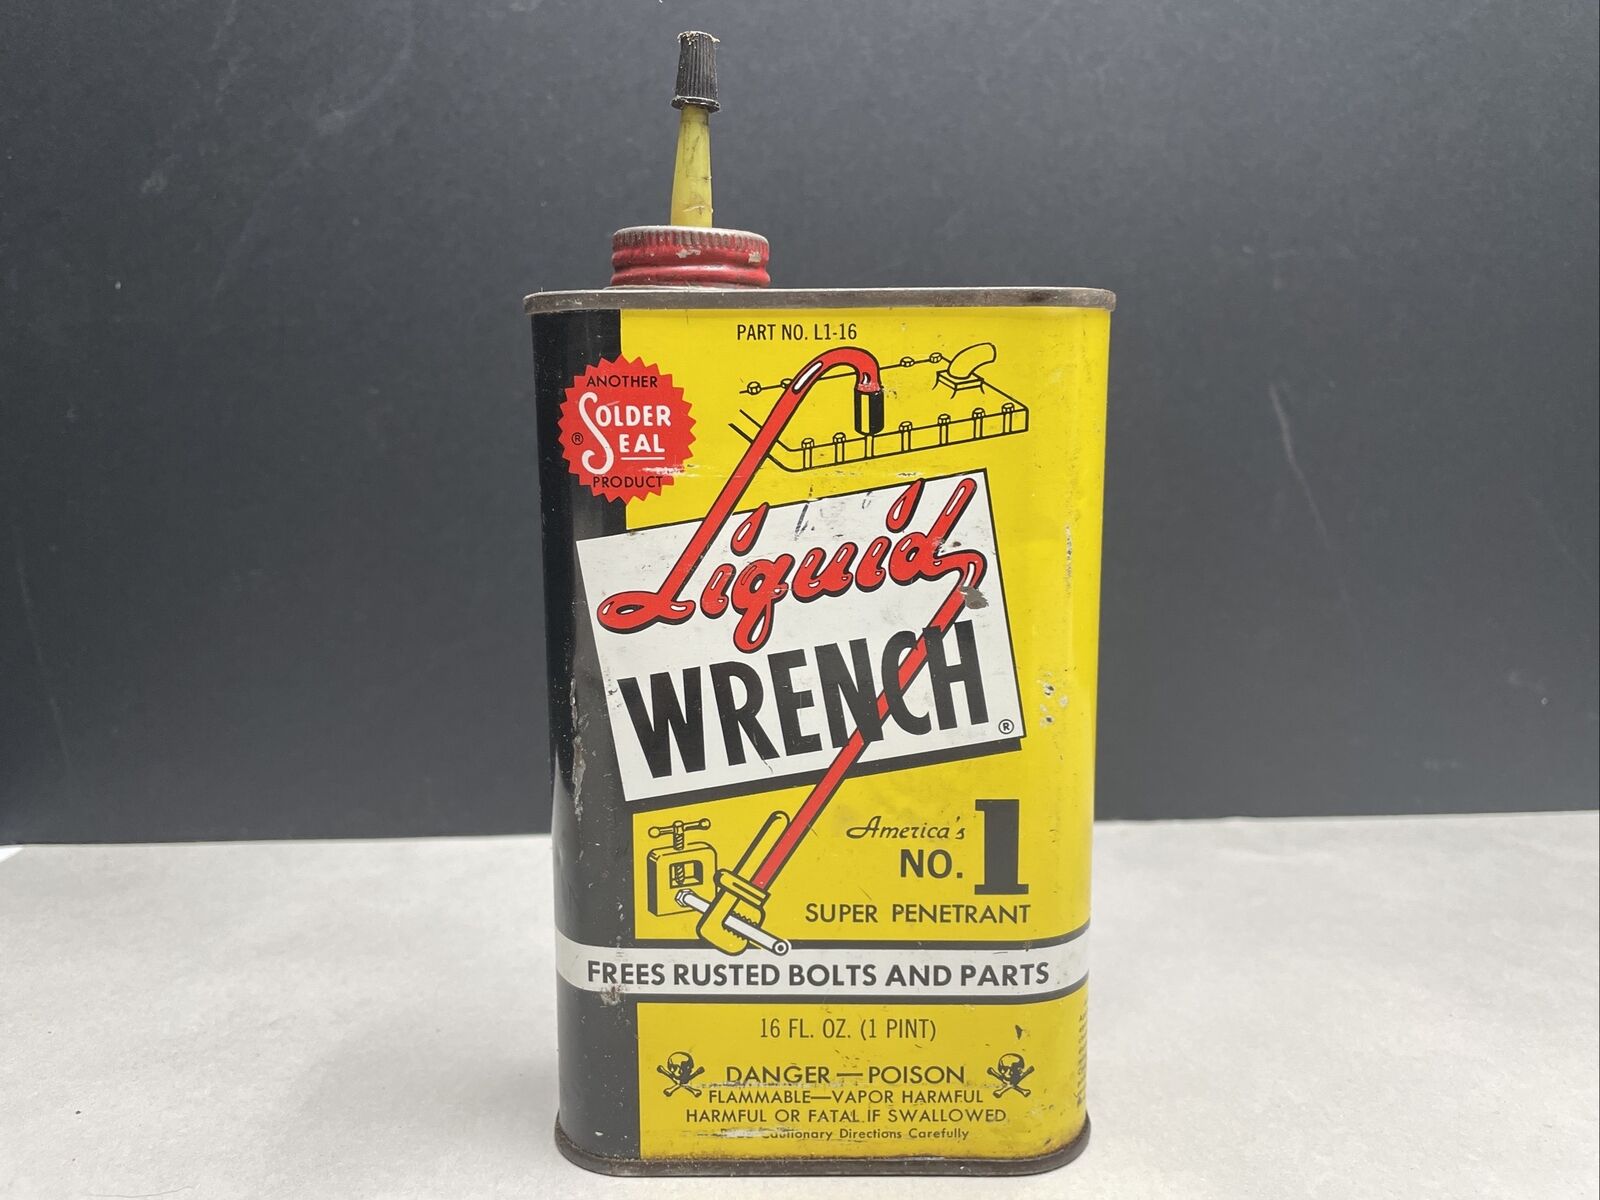 Vintage Liquid Wrench Oil Tin Can 16 oz Spout Advertising Some Left In Can.